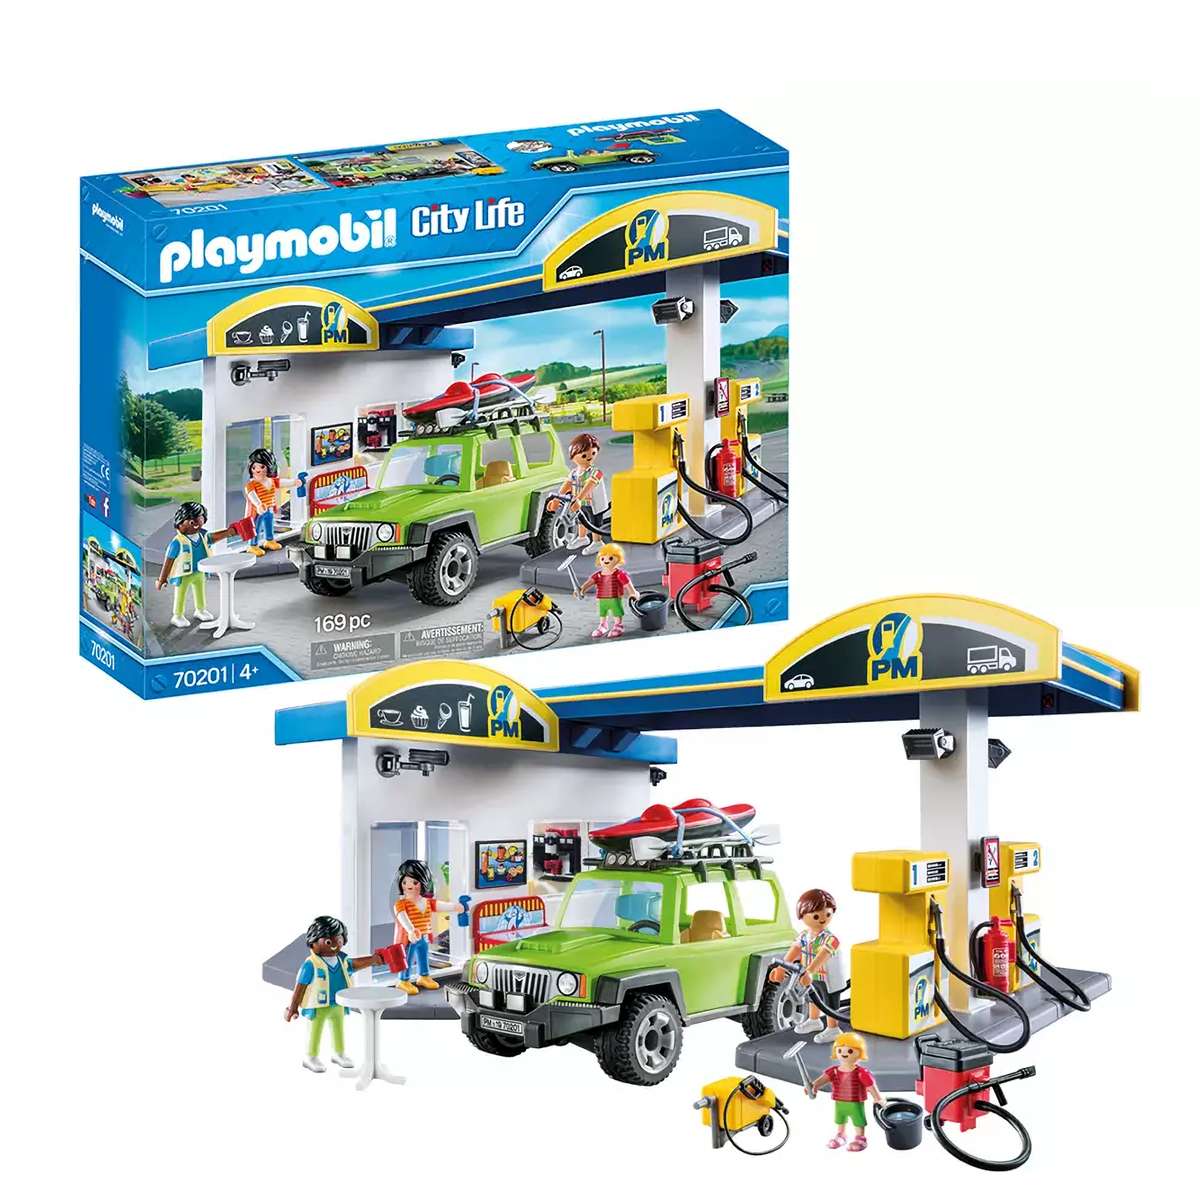 Afstemning support stivhed Playmobil 70201 City Life Petrol Station Toy £22.50 click & collect @ Argos  - hotukdeals